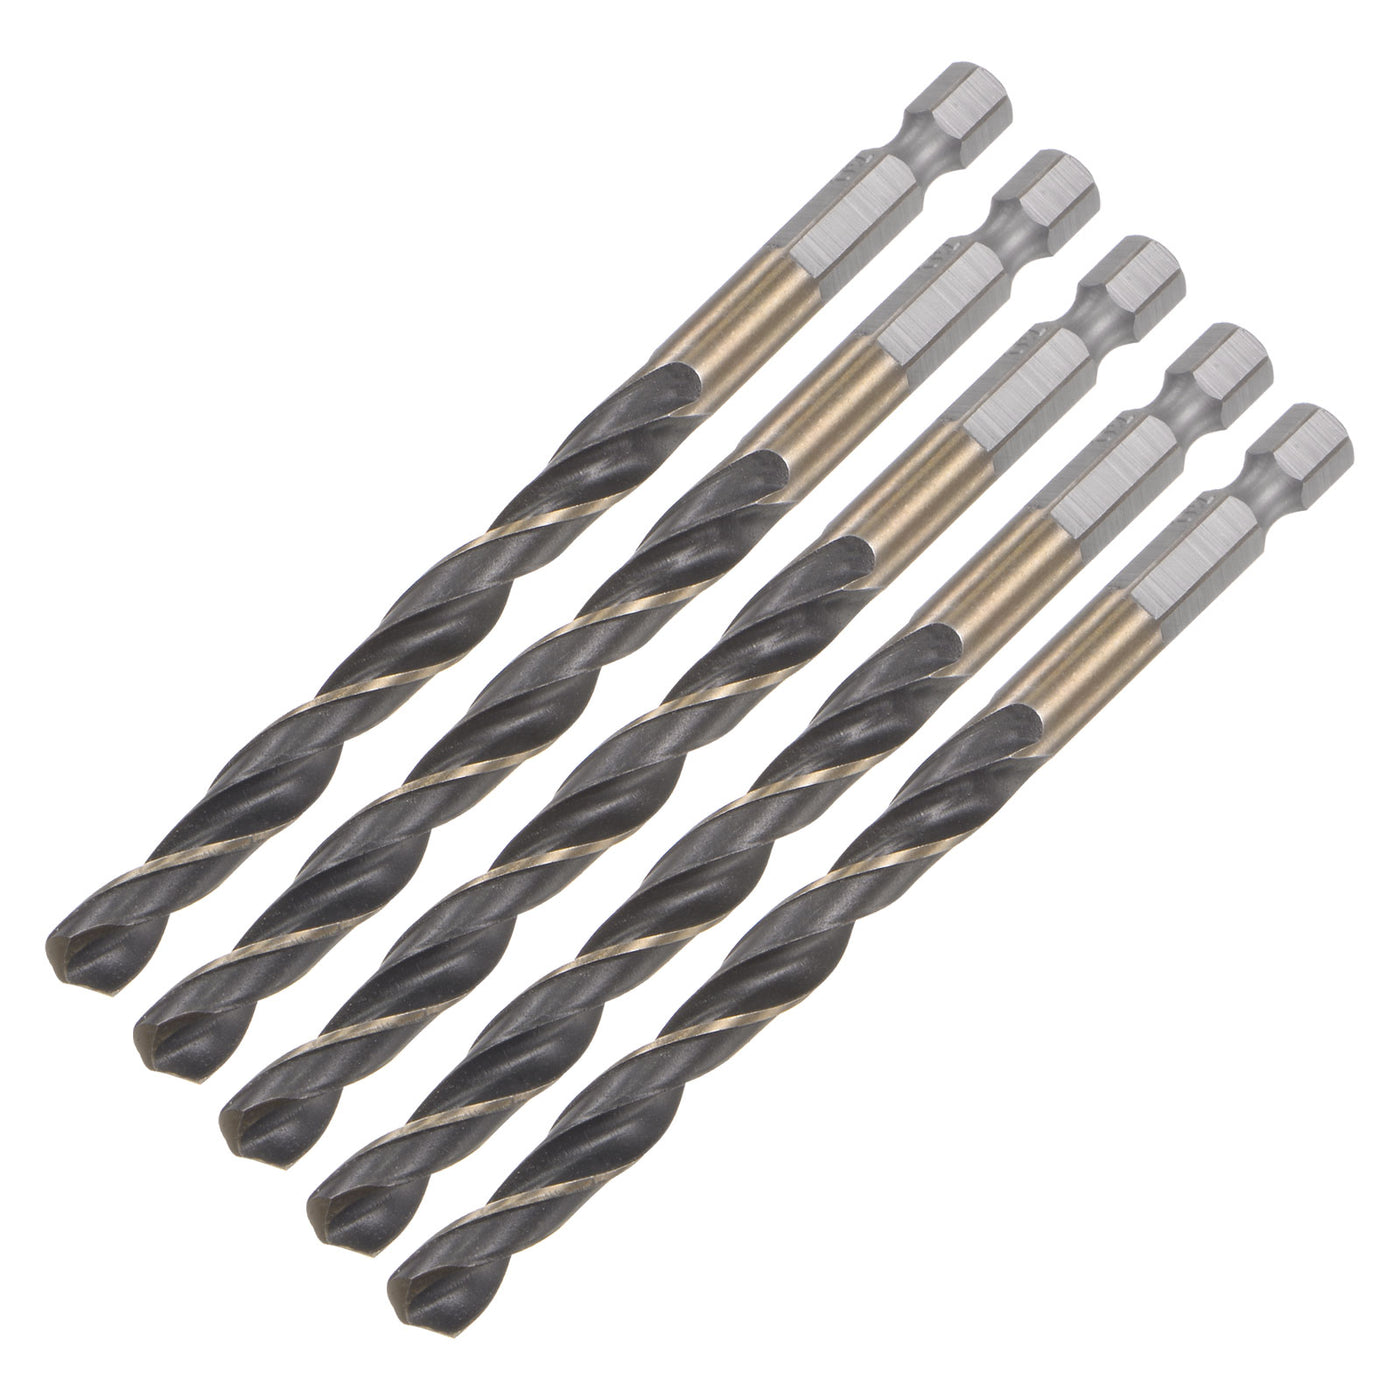 uxcell Uxcell 5Pcs 7mm High Speed Steel Twist Drill Bit with Hex Shank 105mm Length